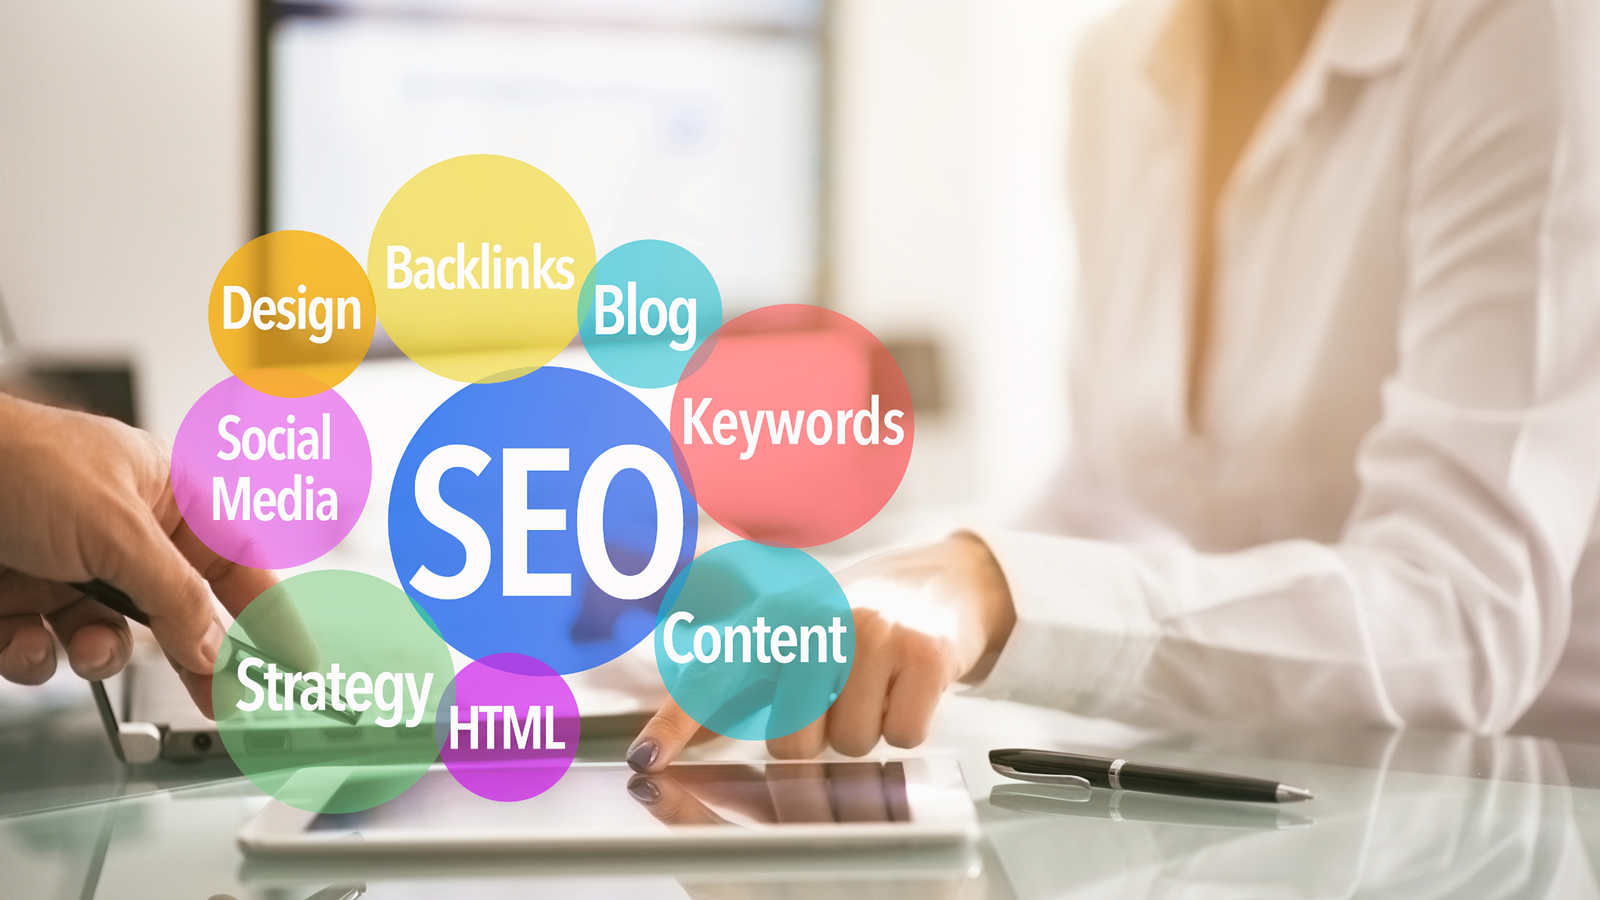 Can SEO consultants help with e-commerce websites